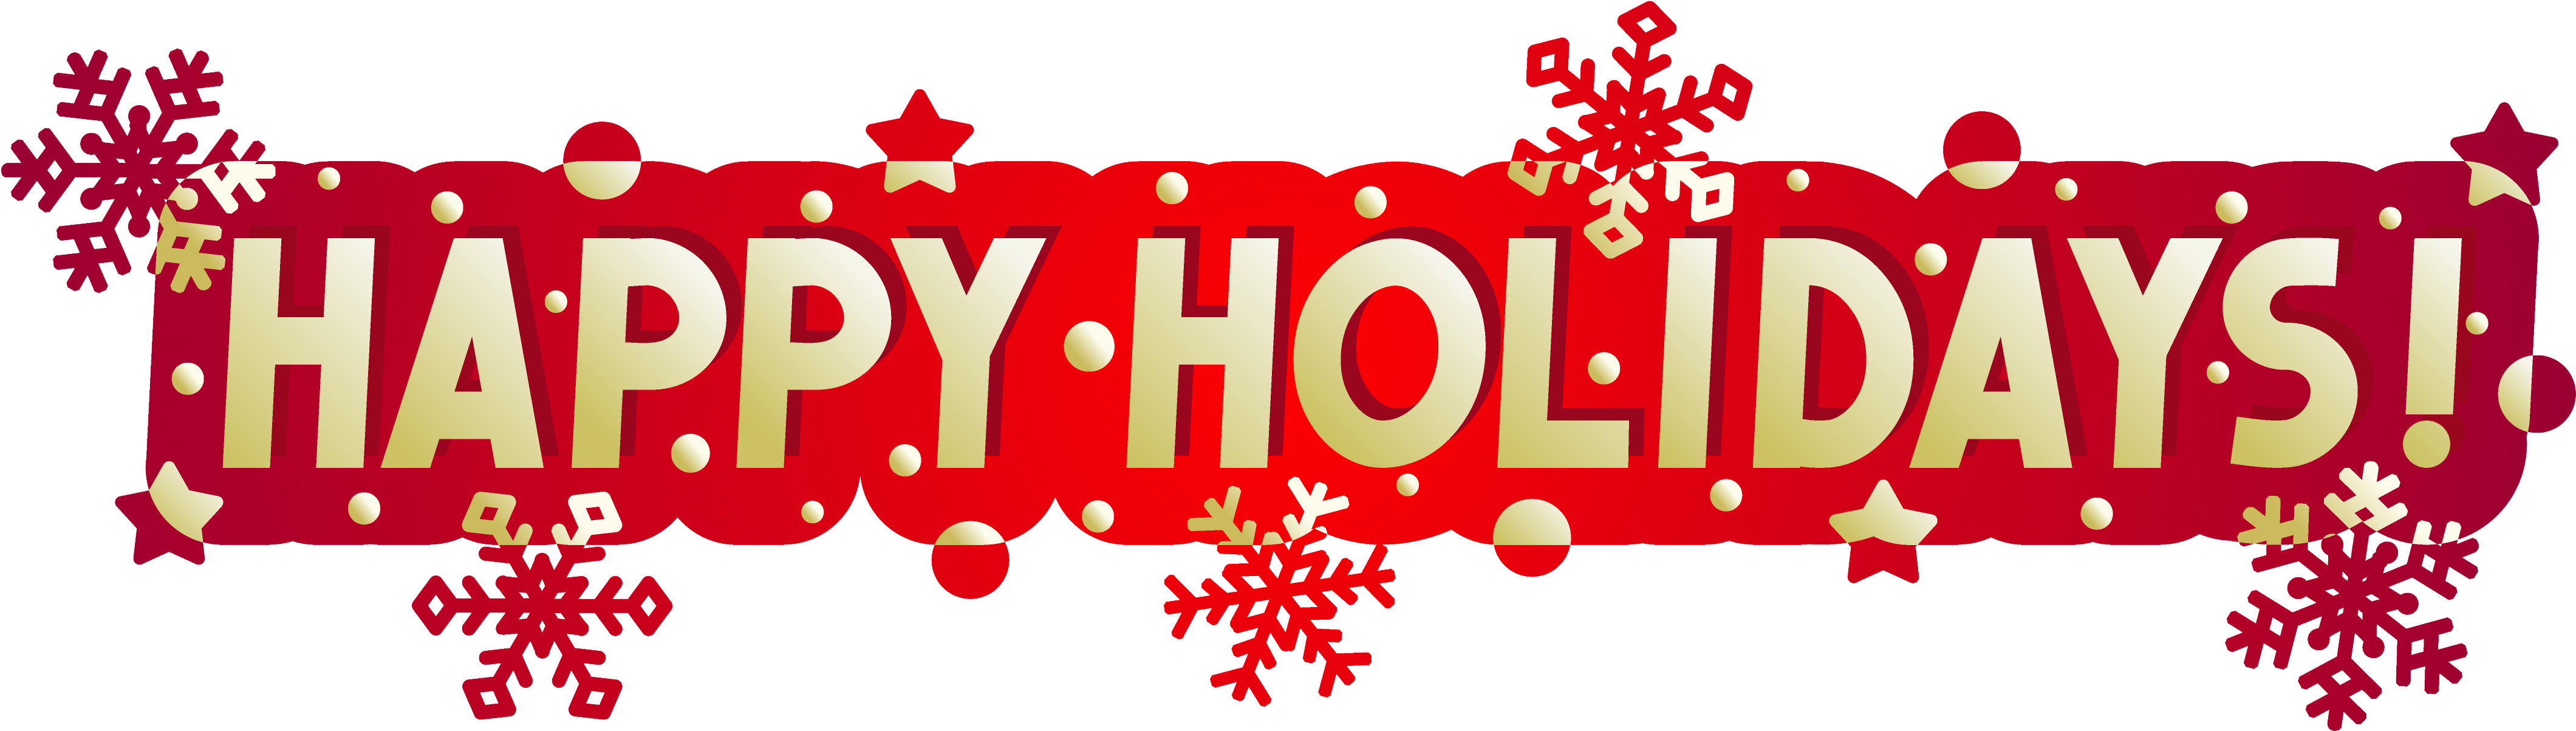 Happy Holidays Banner Graphic PNG image